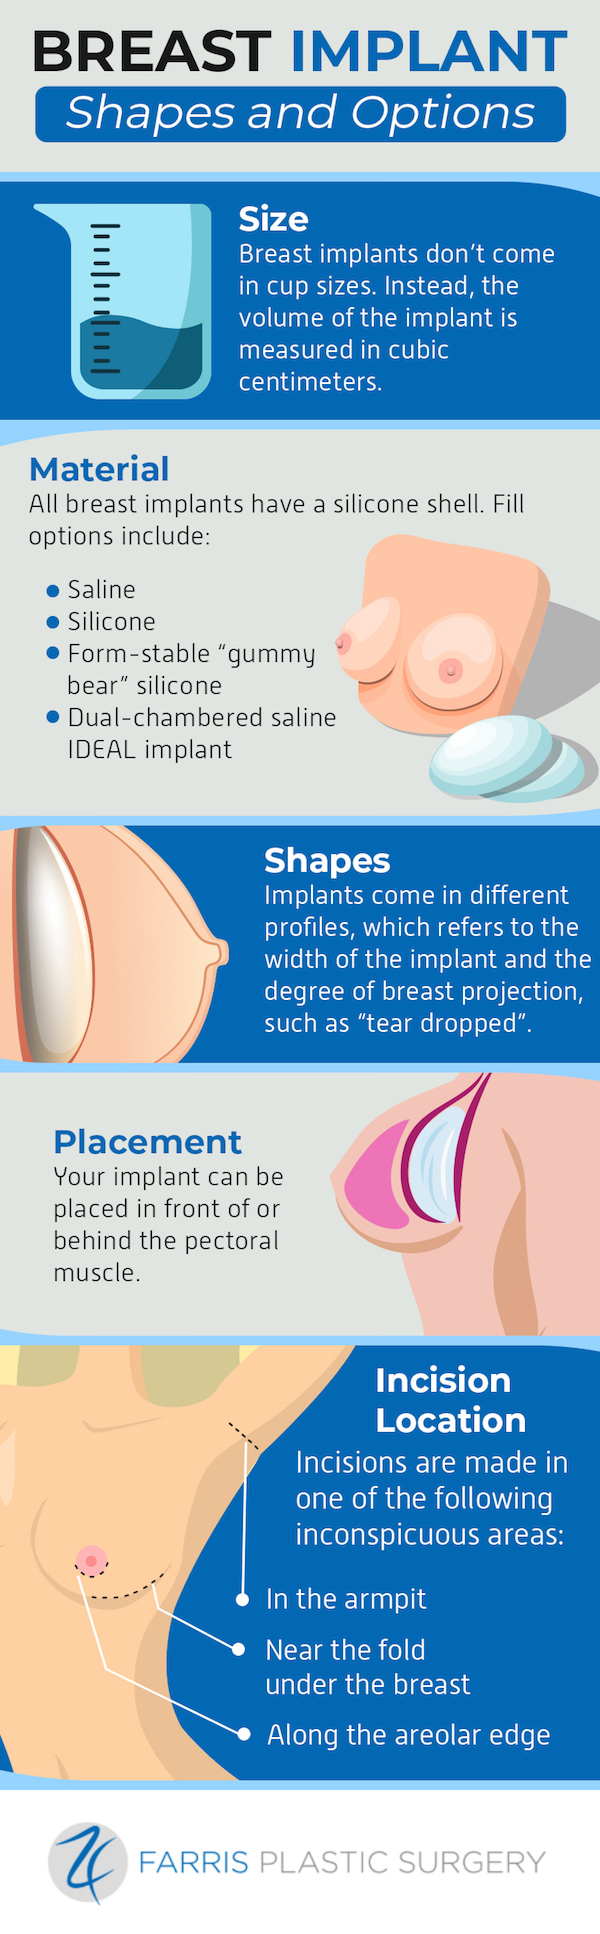 Infographic: Breast implant shapes and options